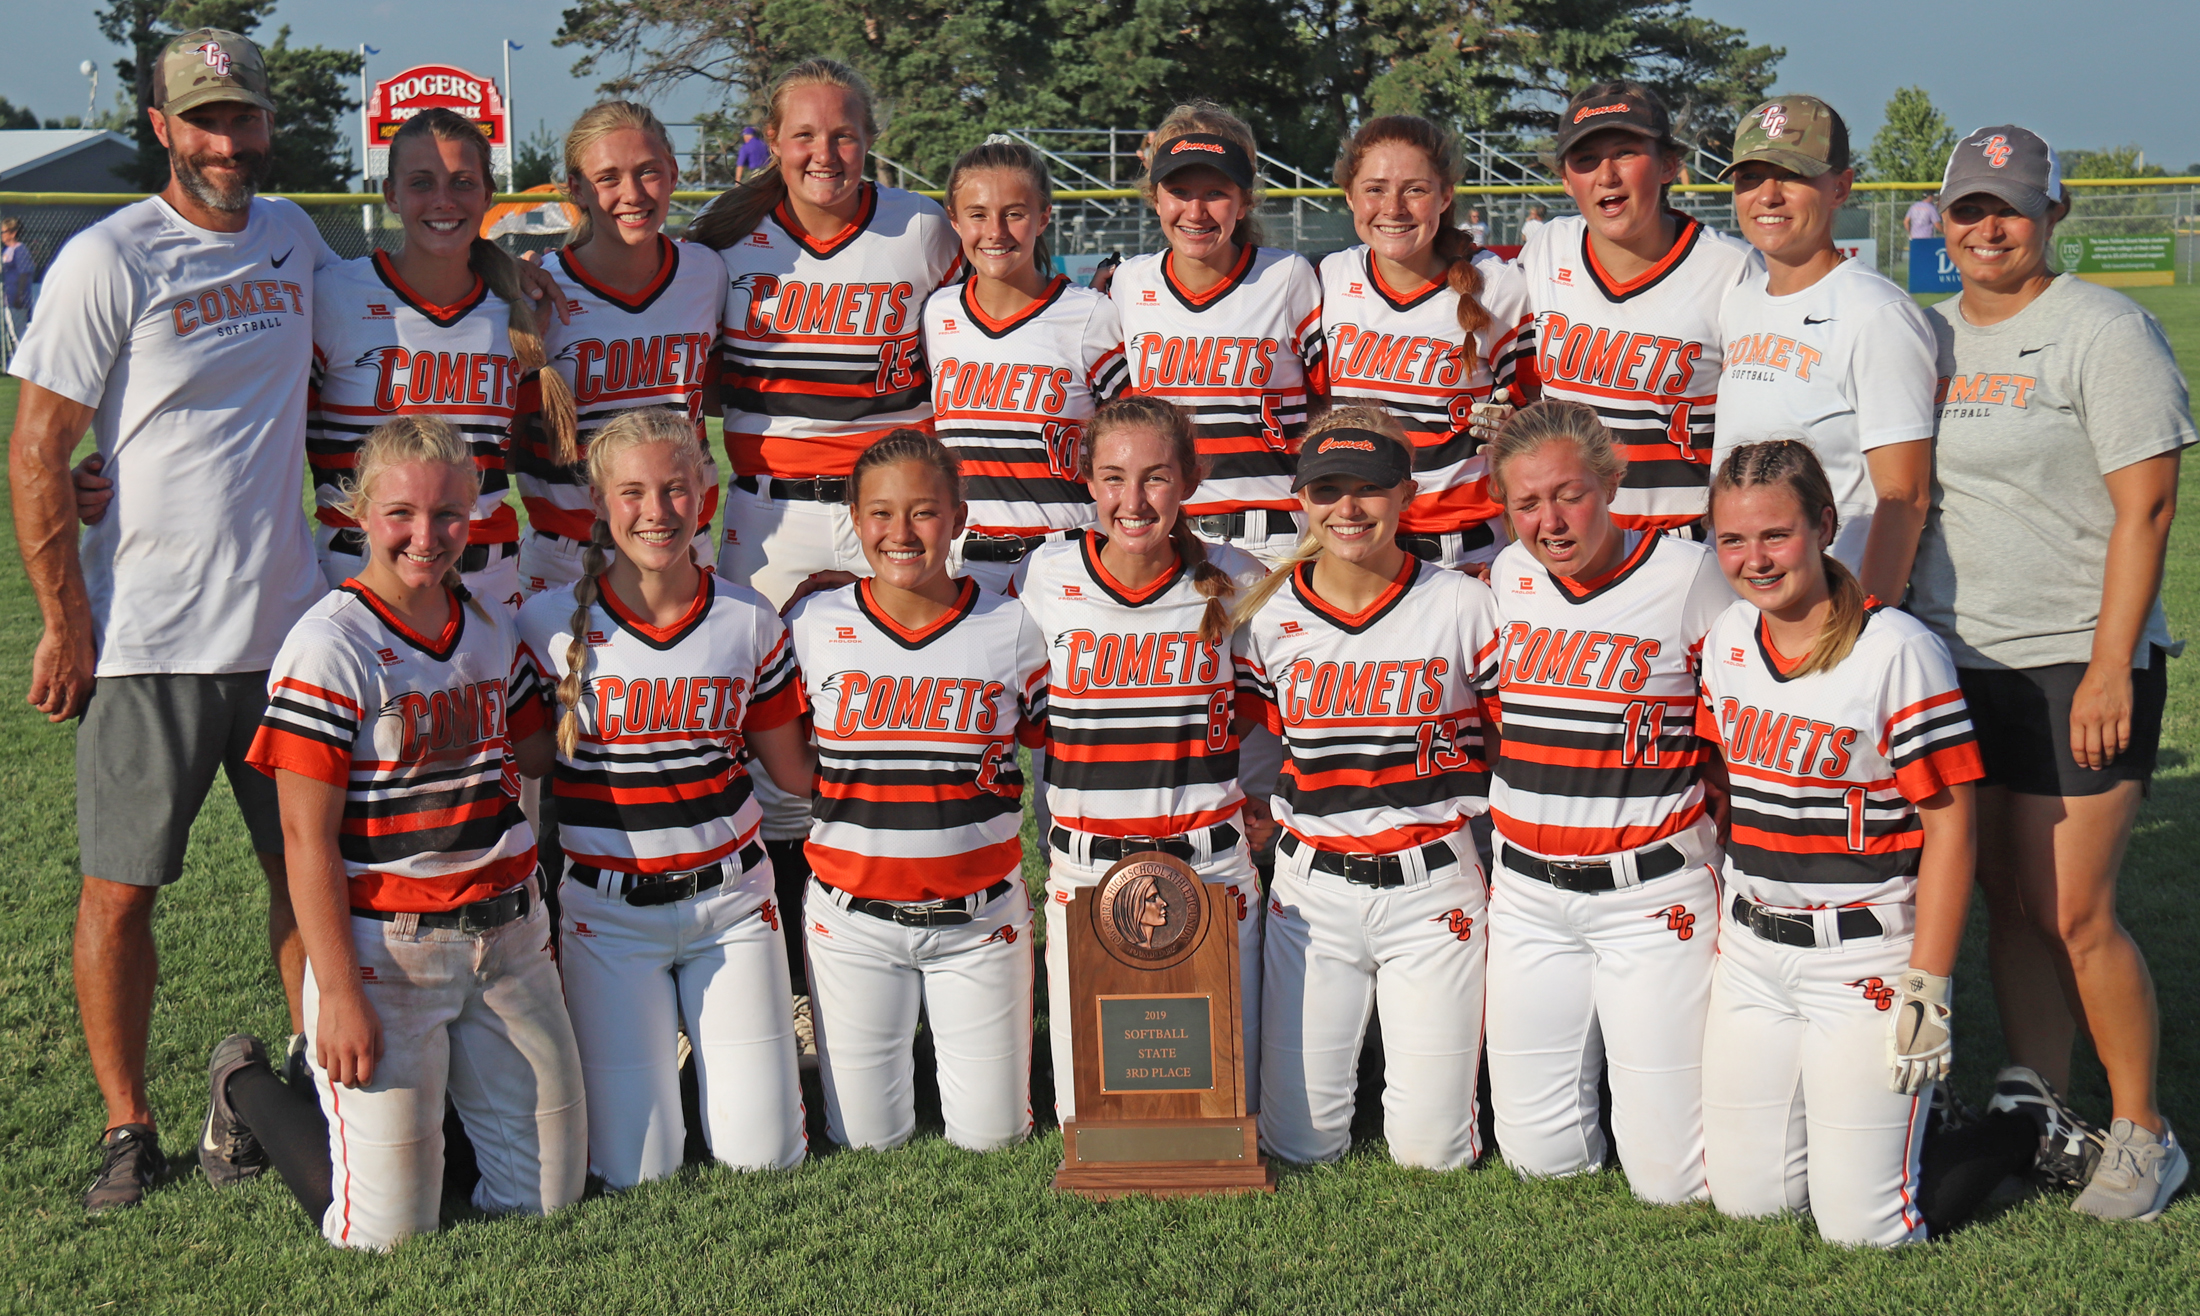 Comets rally back to take 3rd at State